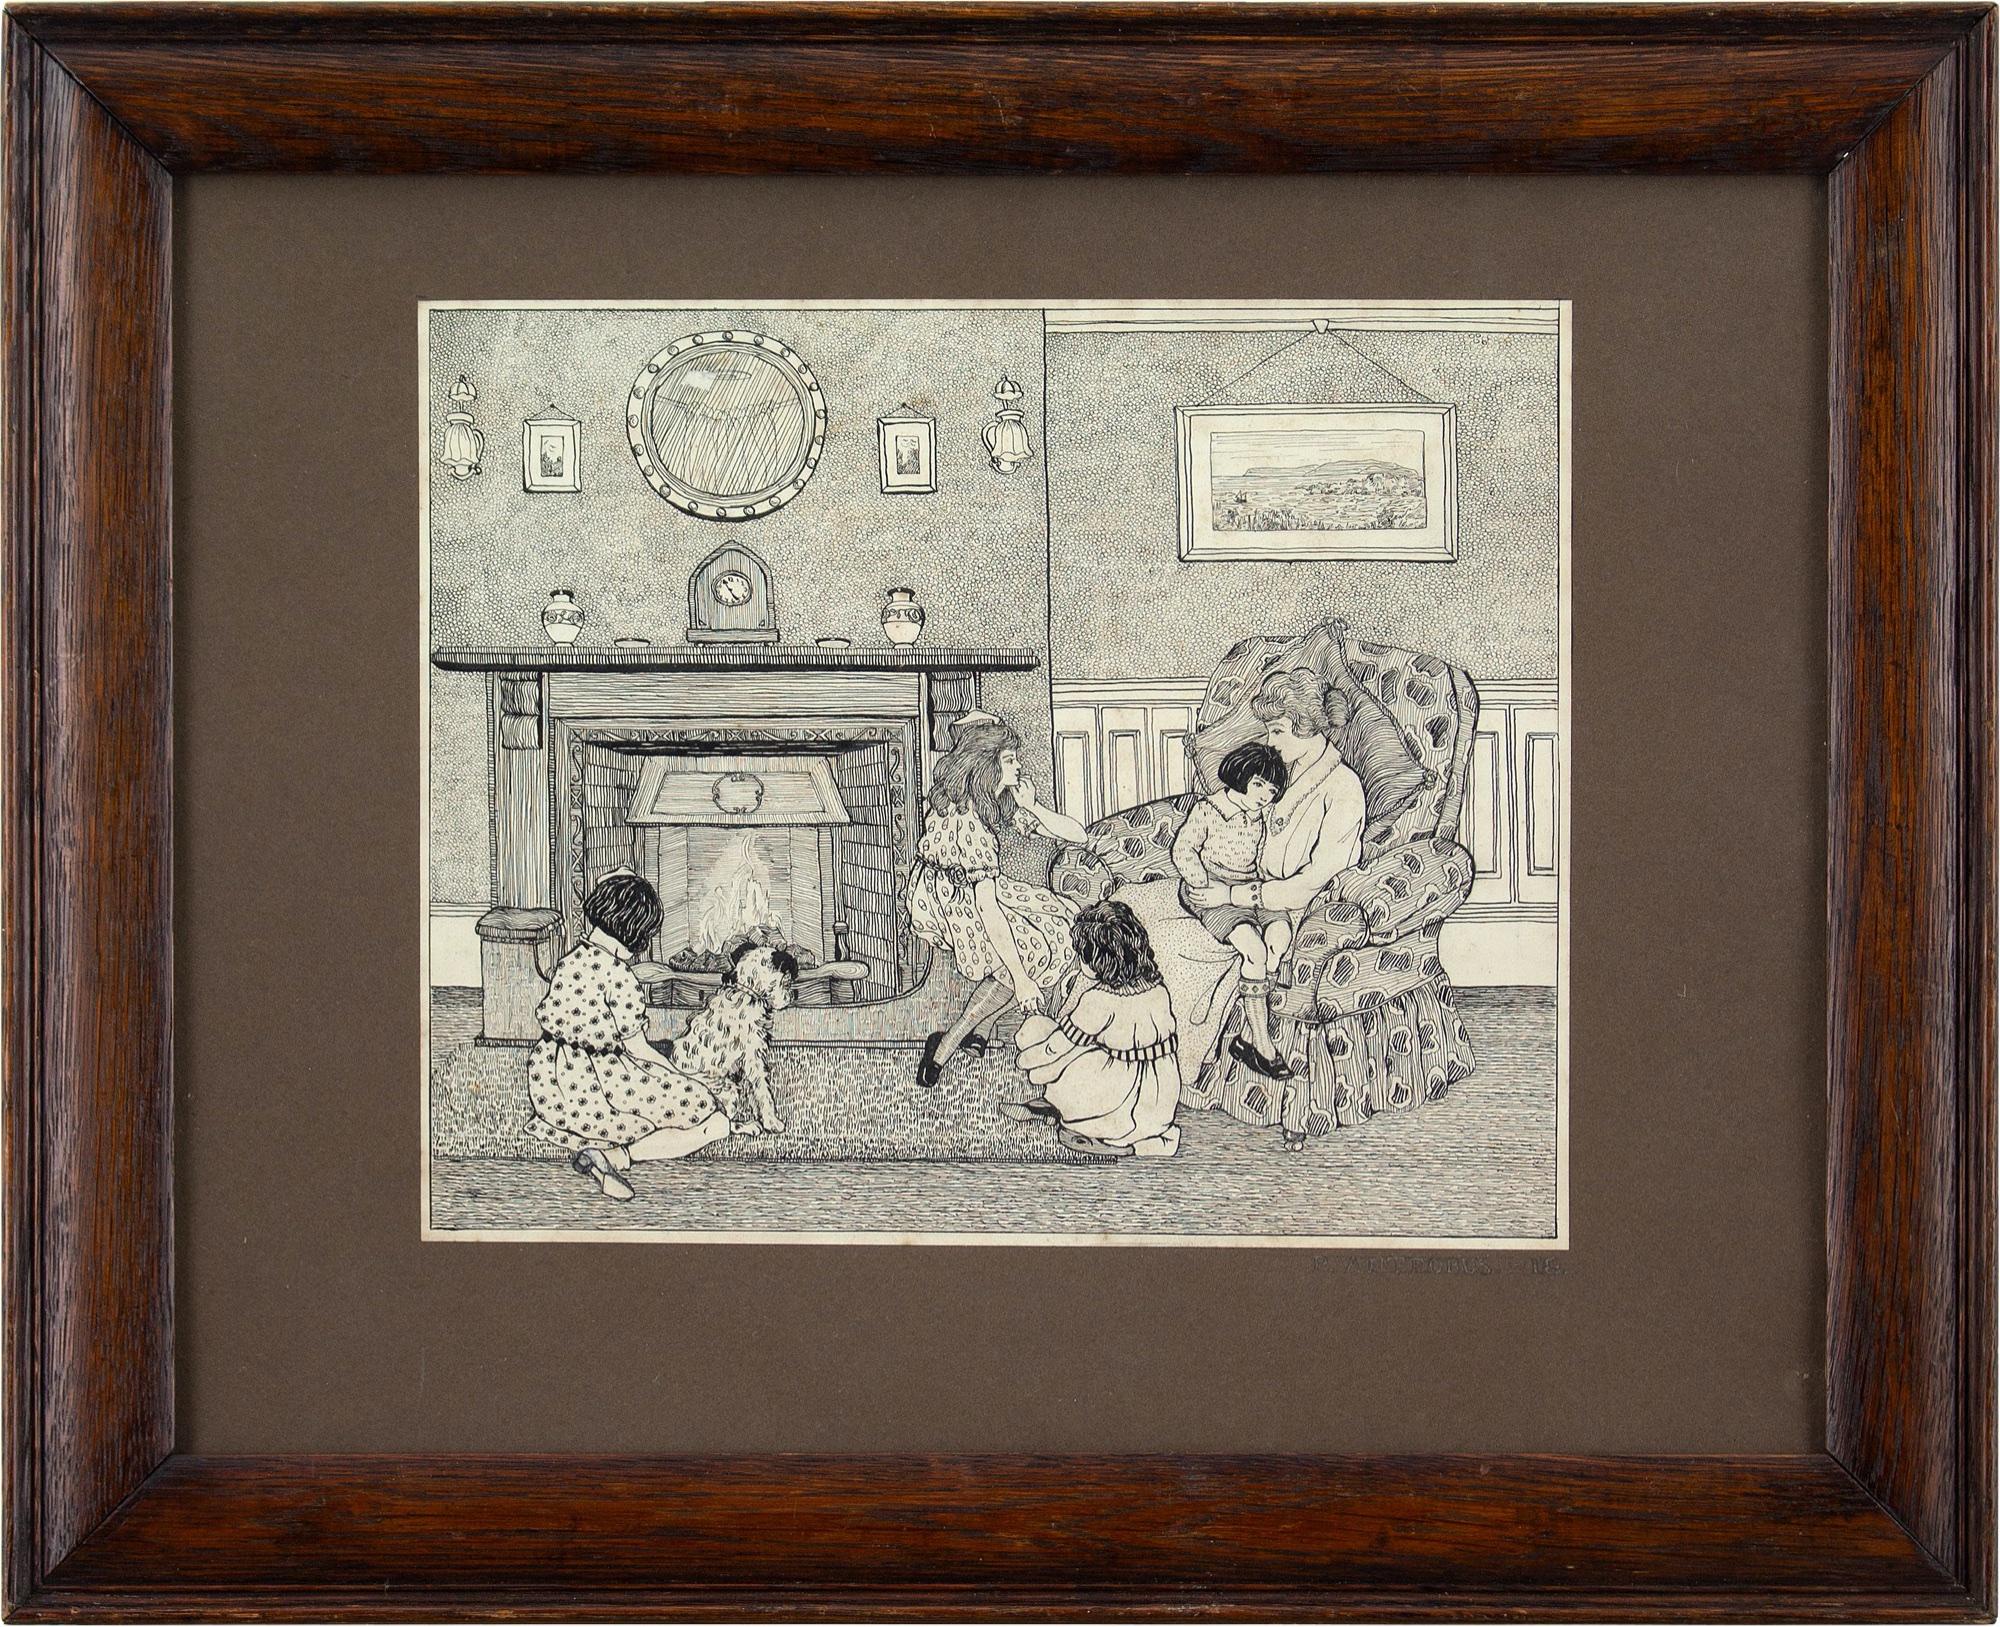 This early 20th-century drawing by British artist Phyllis Mary Antrobus (1905-1983) depicts a family within a lounge interior. It was produced in 1918 when she was 13 years old and perhaps one of these young ladies is her.

It’s a particularly